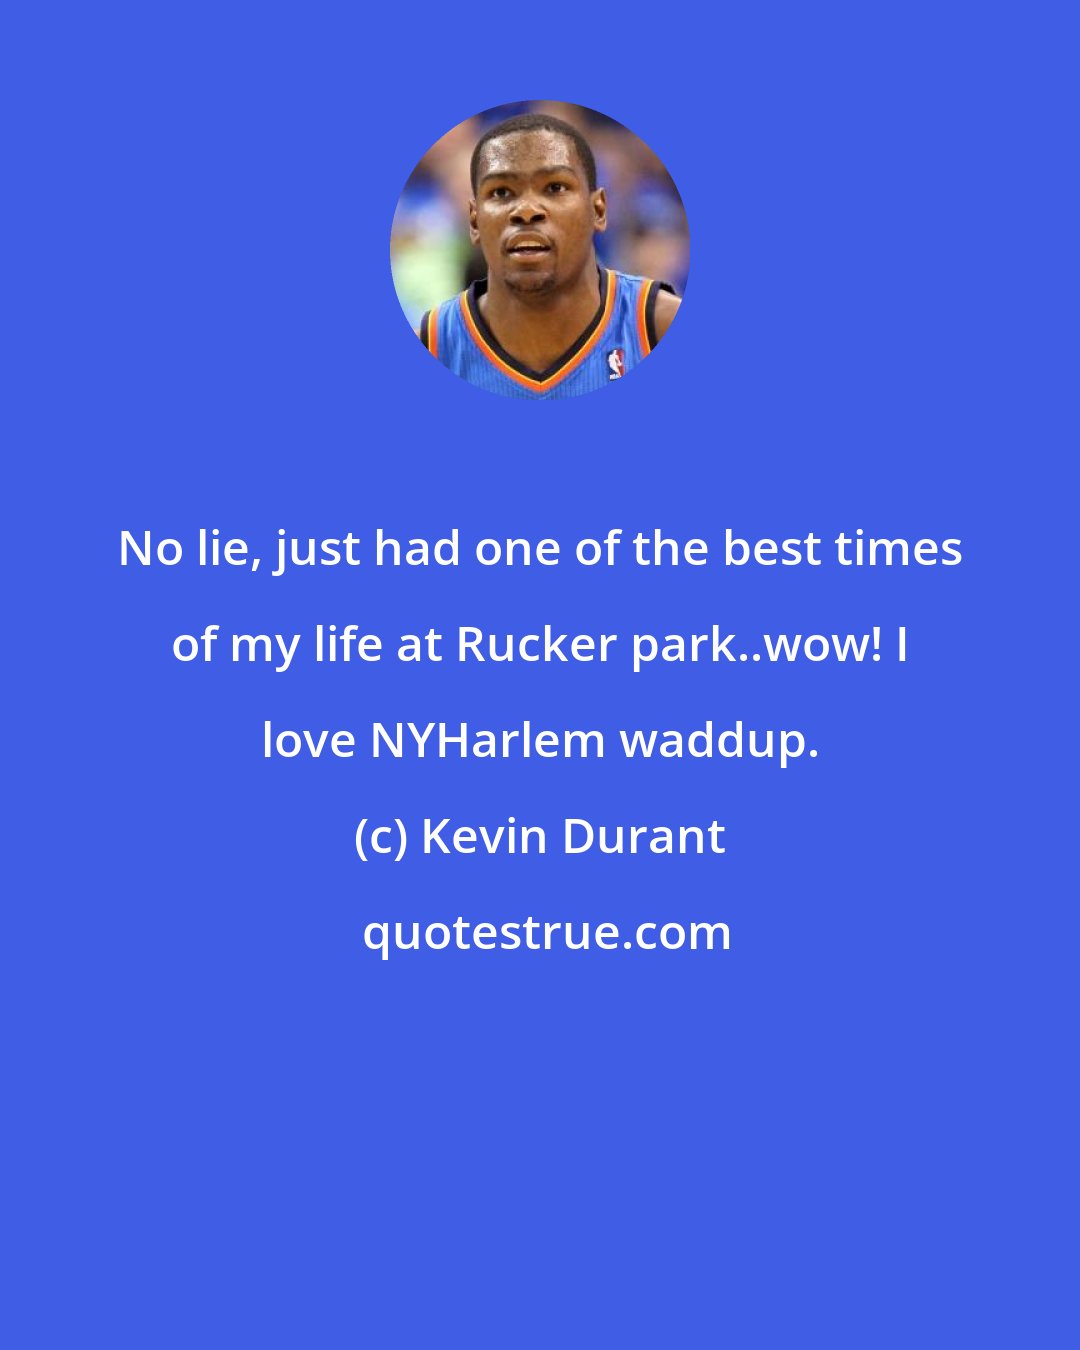 Kevin Durant: No lie, just had one of the best times of my life at Rucker park..wow! I love NYHarlem waddup.